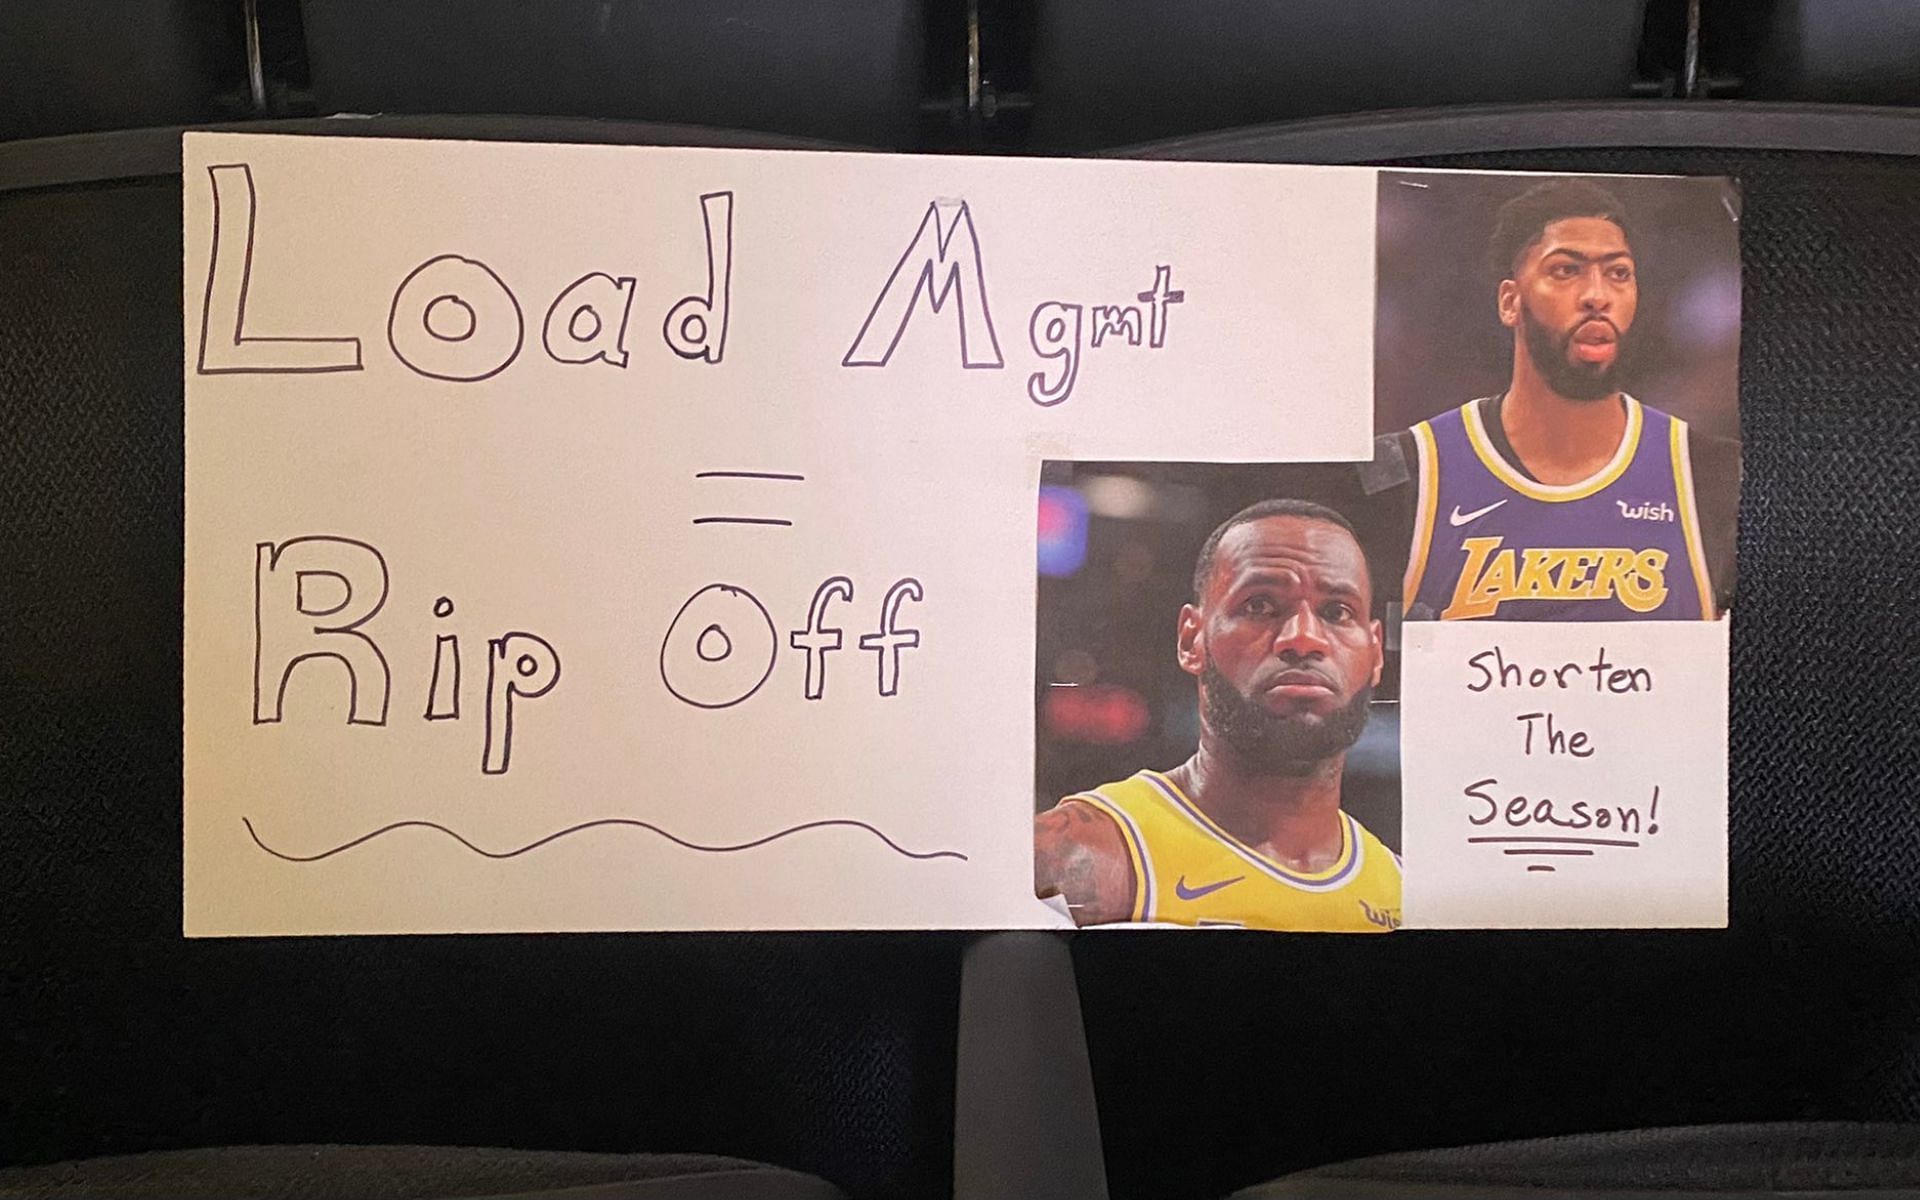 Fan leaves sign at the end of Lakers-Nets game [Photo source: Twitter]